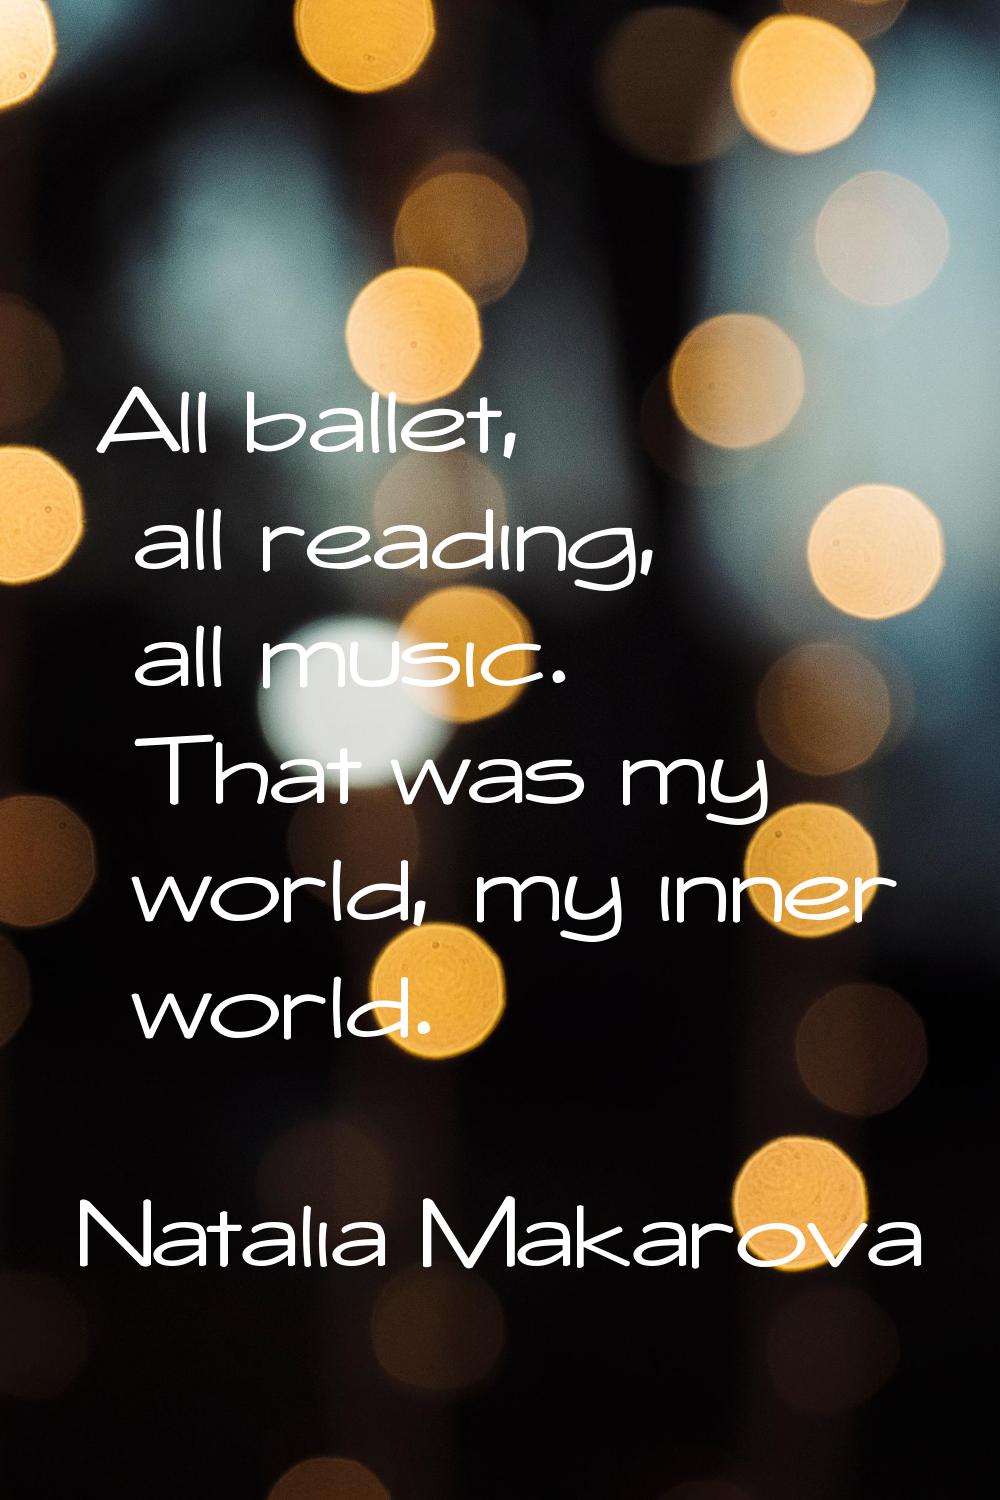 All ballet, all reading, all music. That was my world, my inner world.